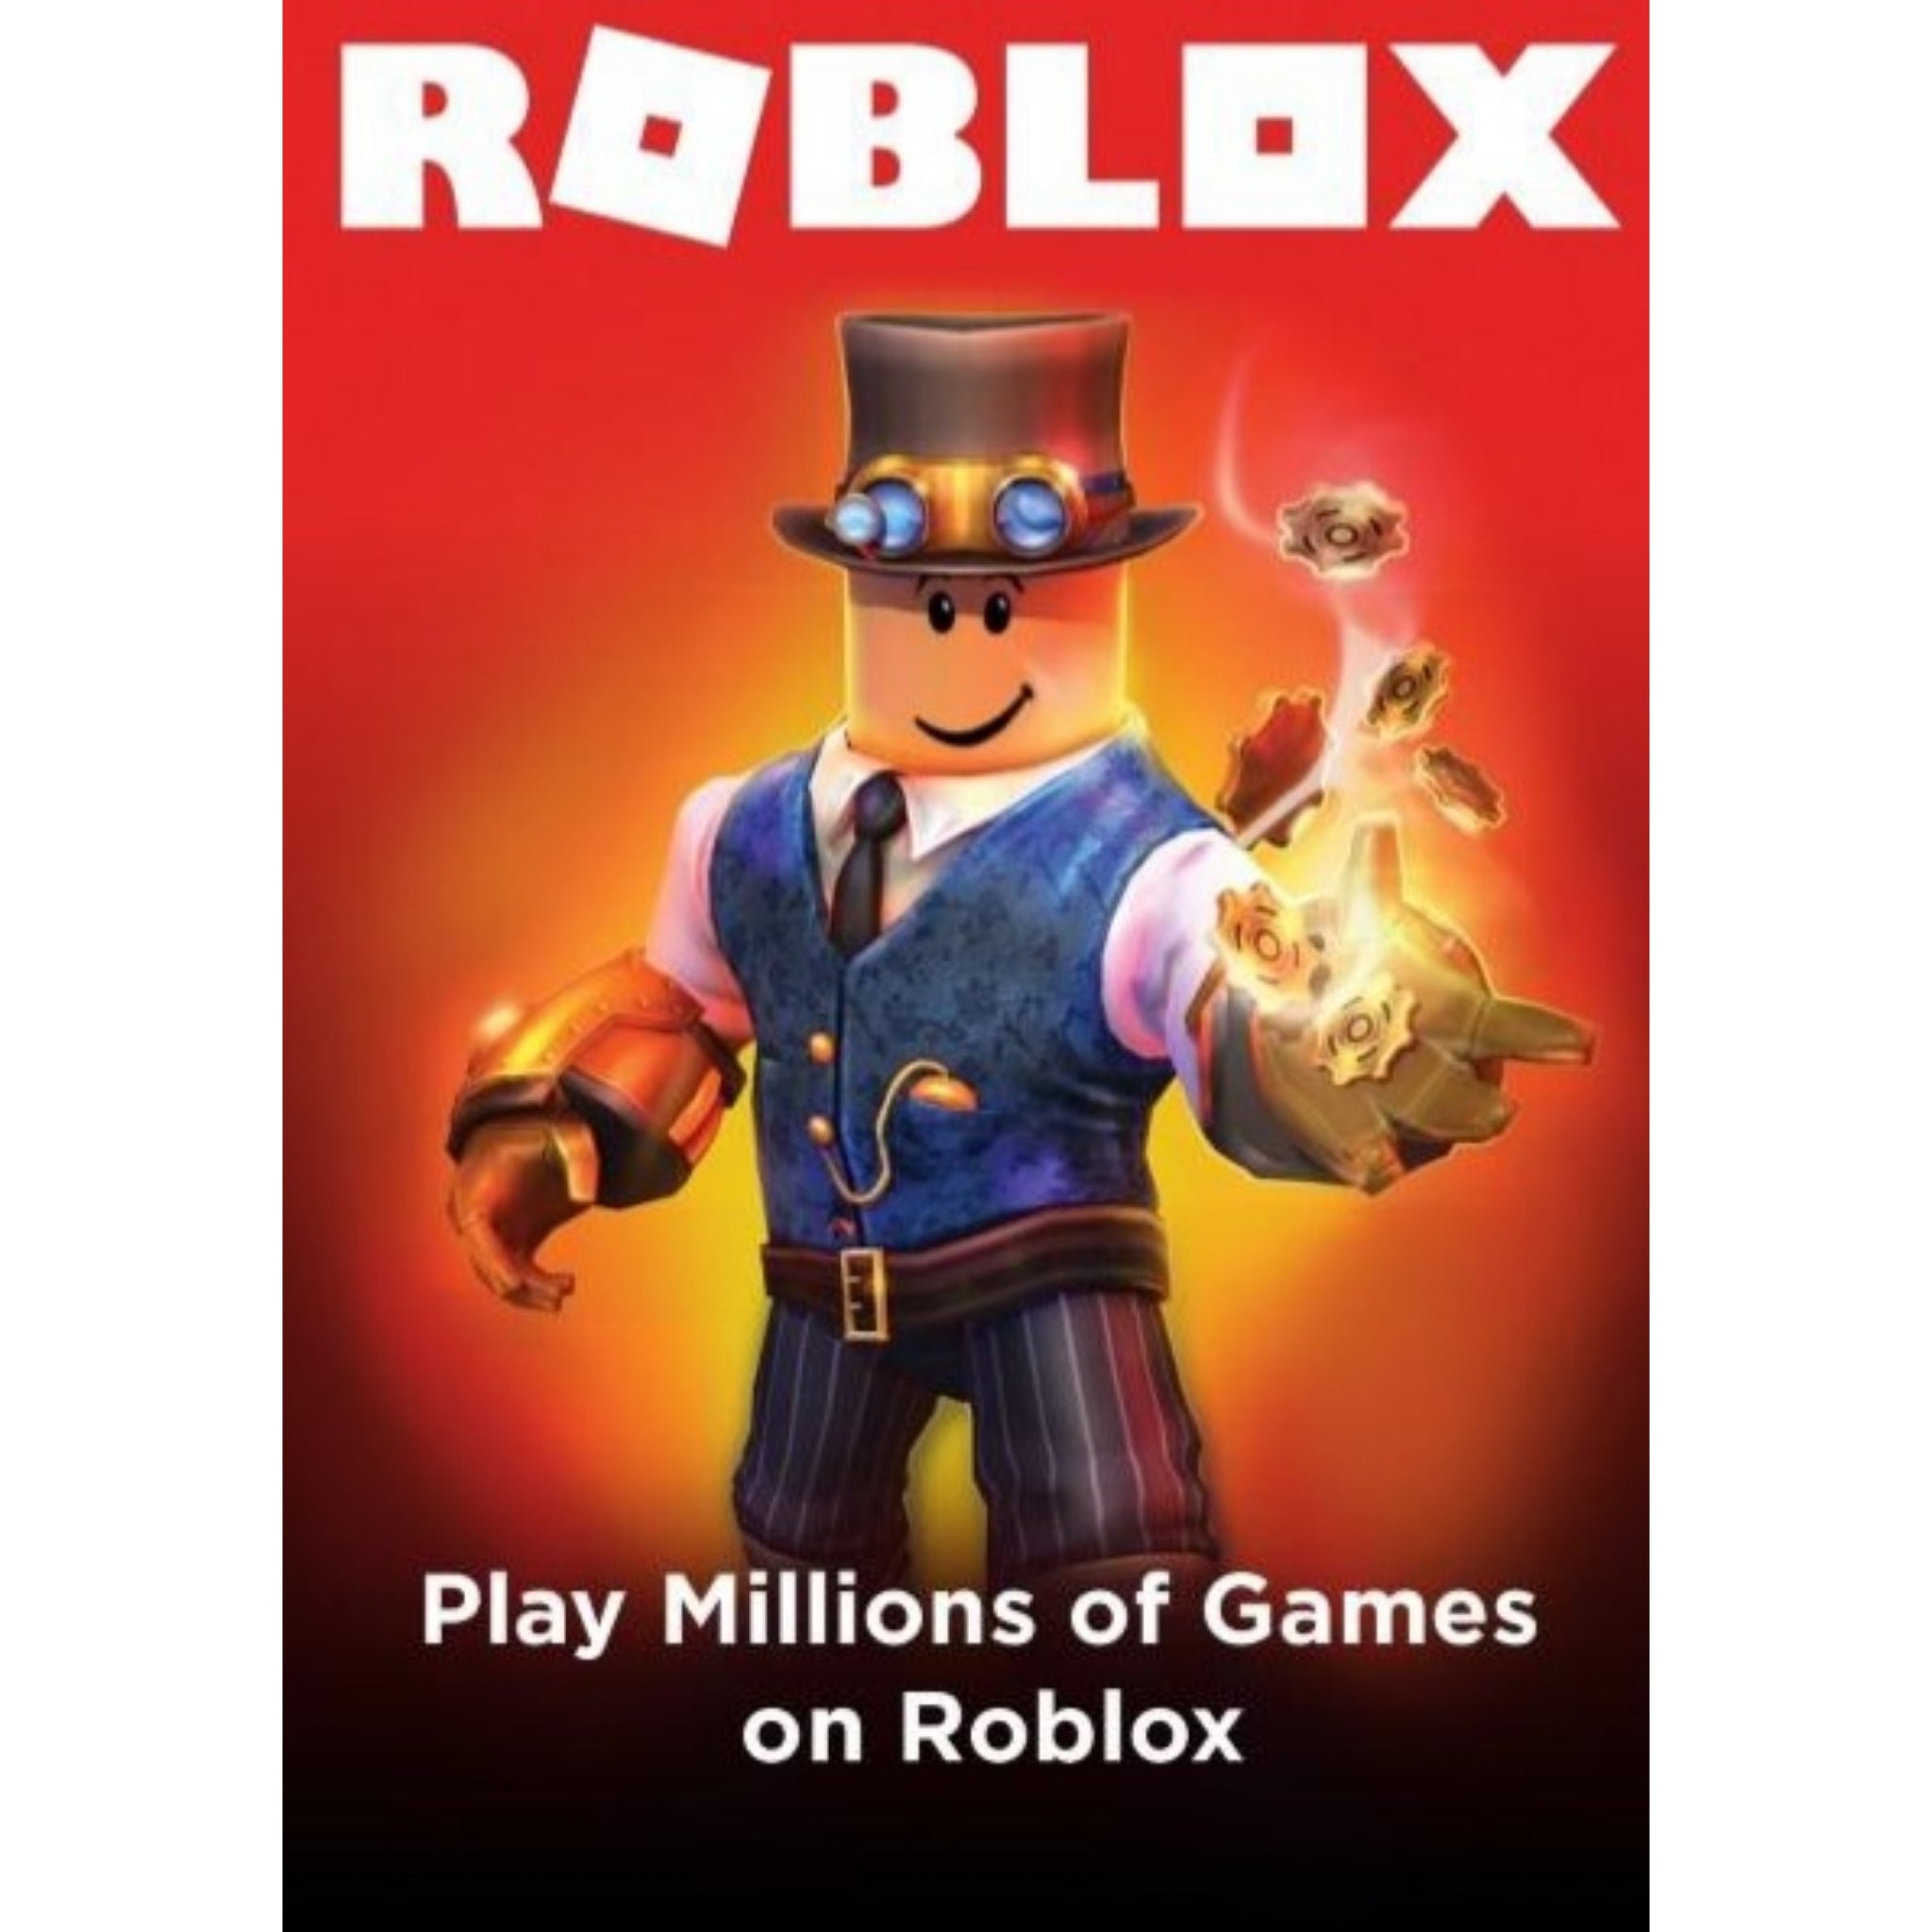 Gaming.me - NEW ROBLOX Gift Cards Roblox 10 $ card is available at all #omt  shops around Lebanon ROBLOX is a massively multiplayer online and game  creation system platform that allows users